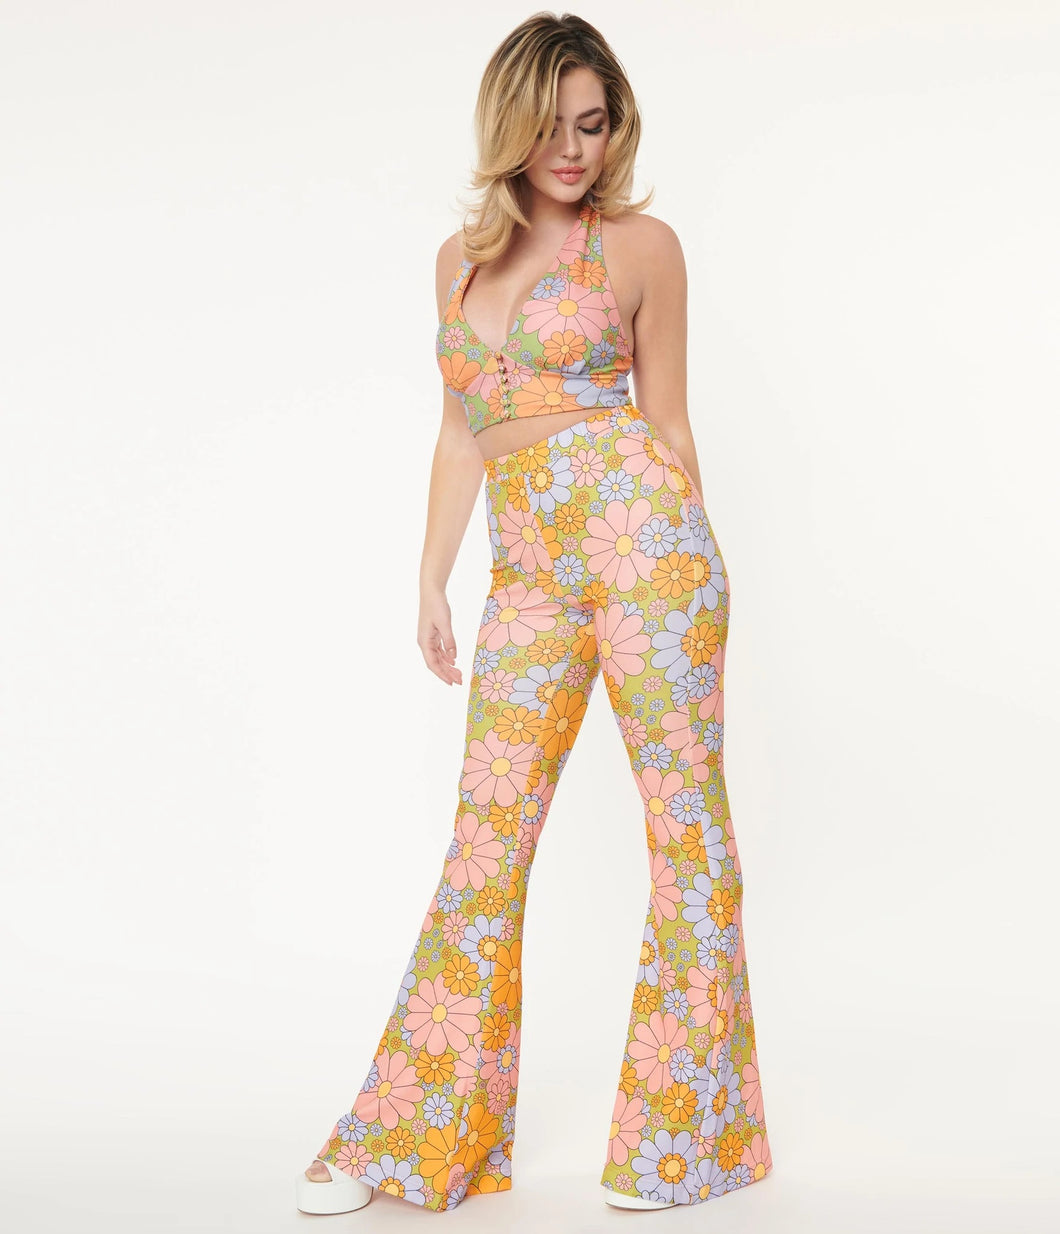 70's Retro Daisy Find Your Flare Pants